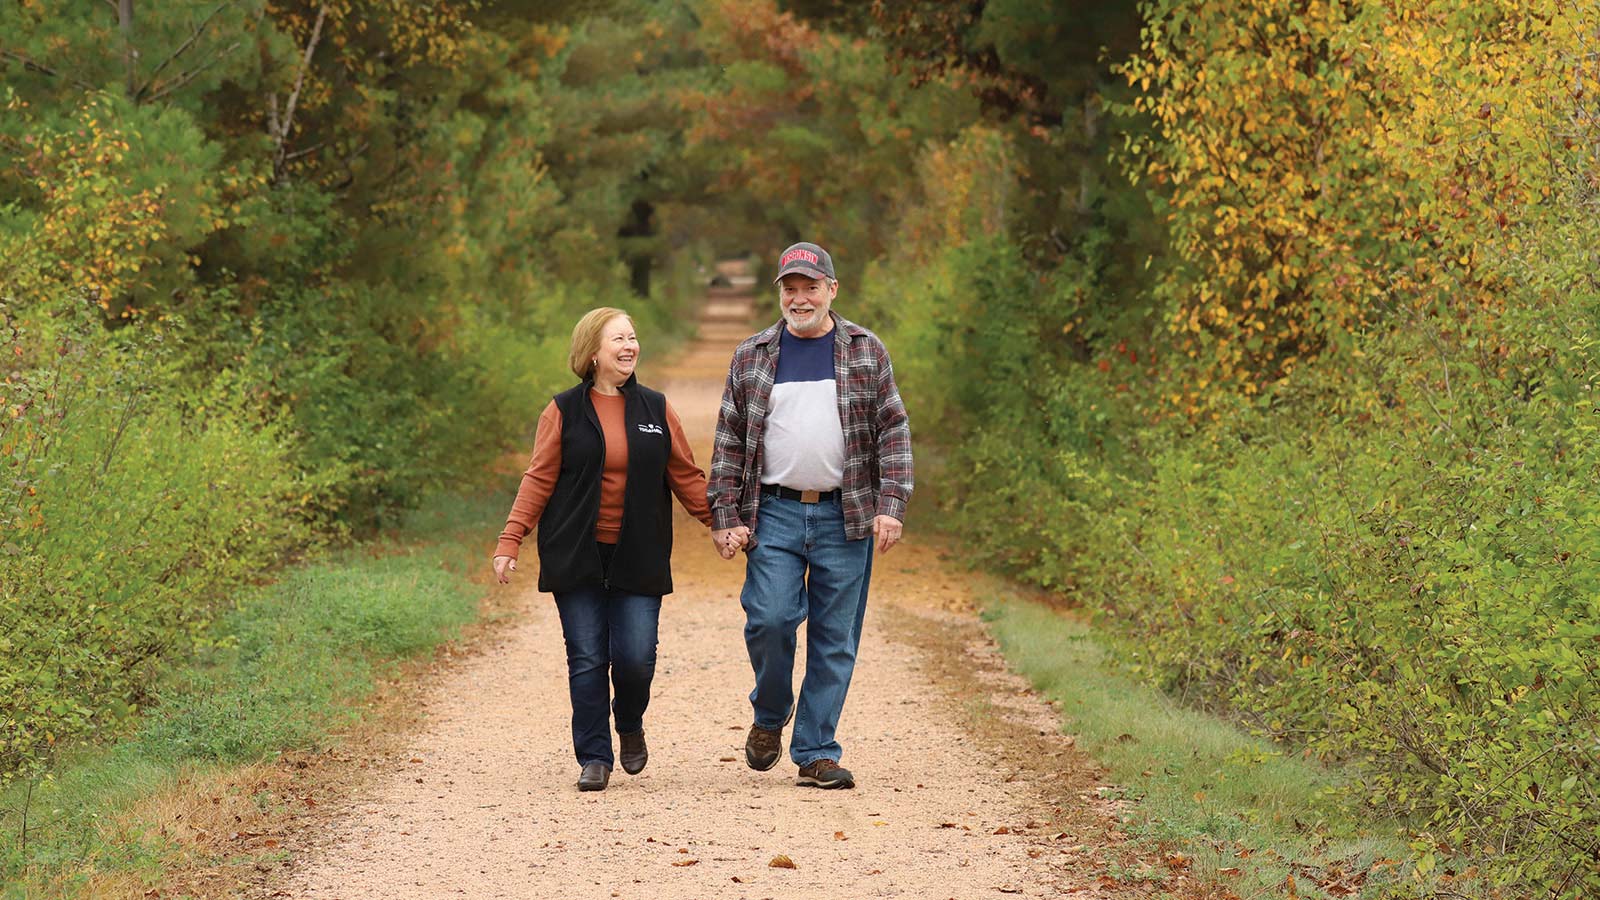 Couple walking on the trail holding hands in the fall